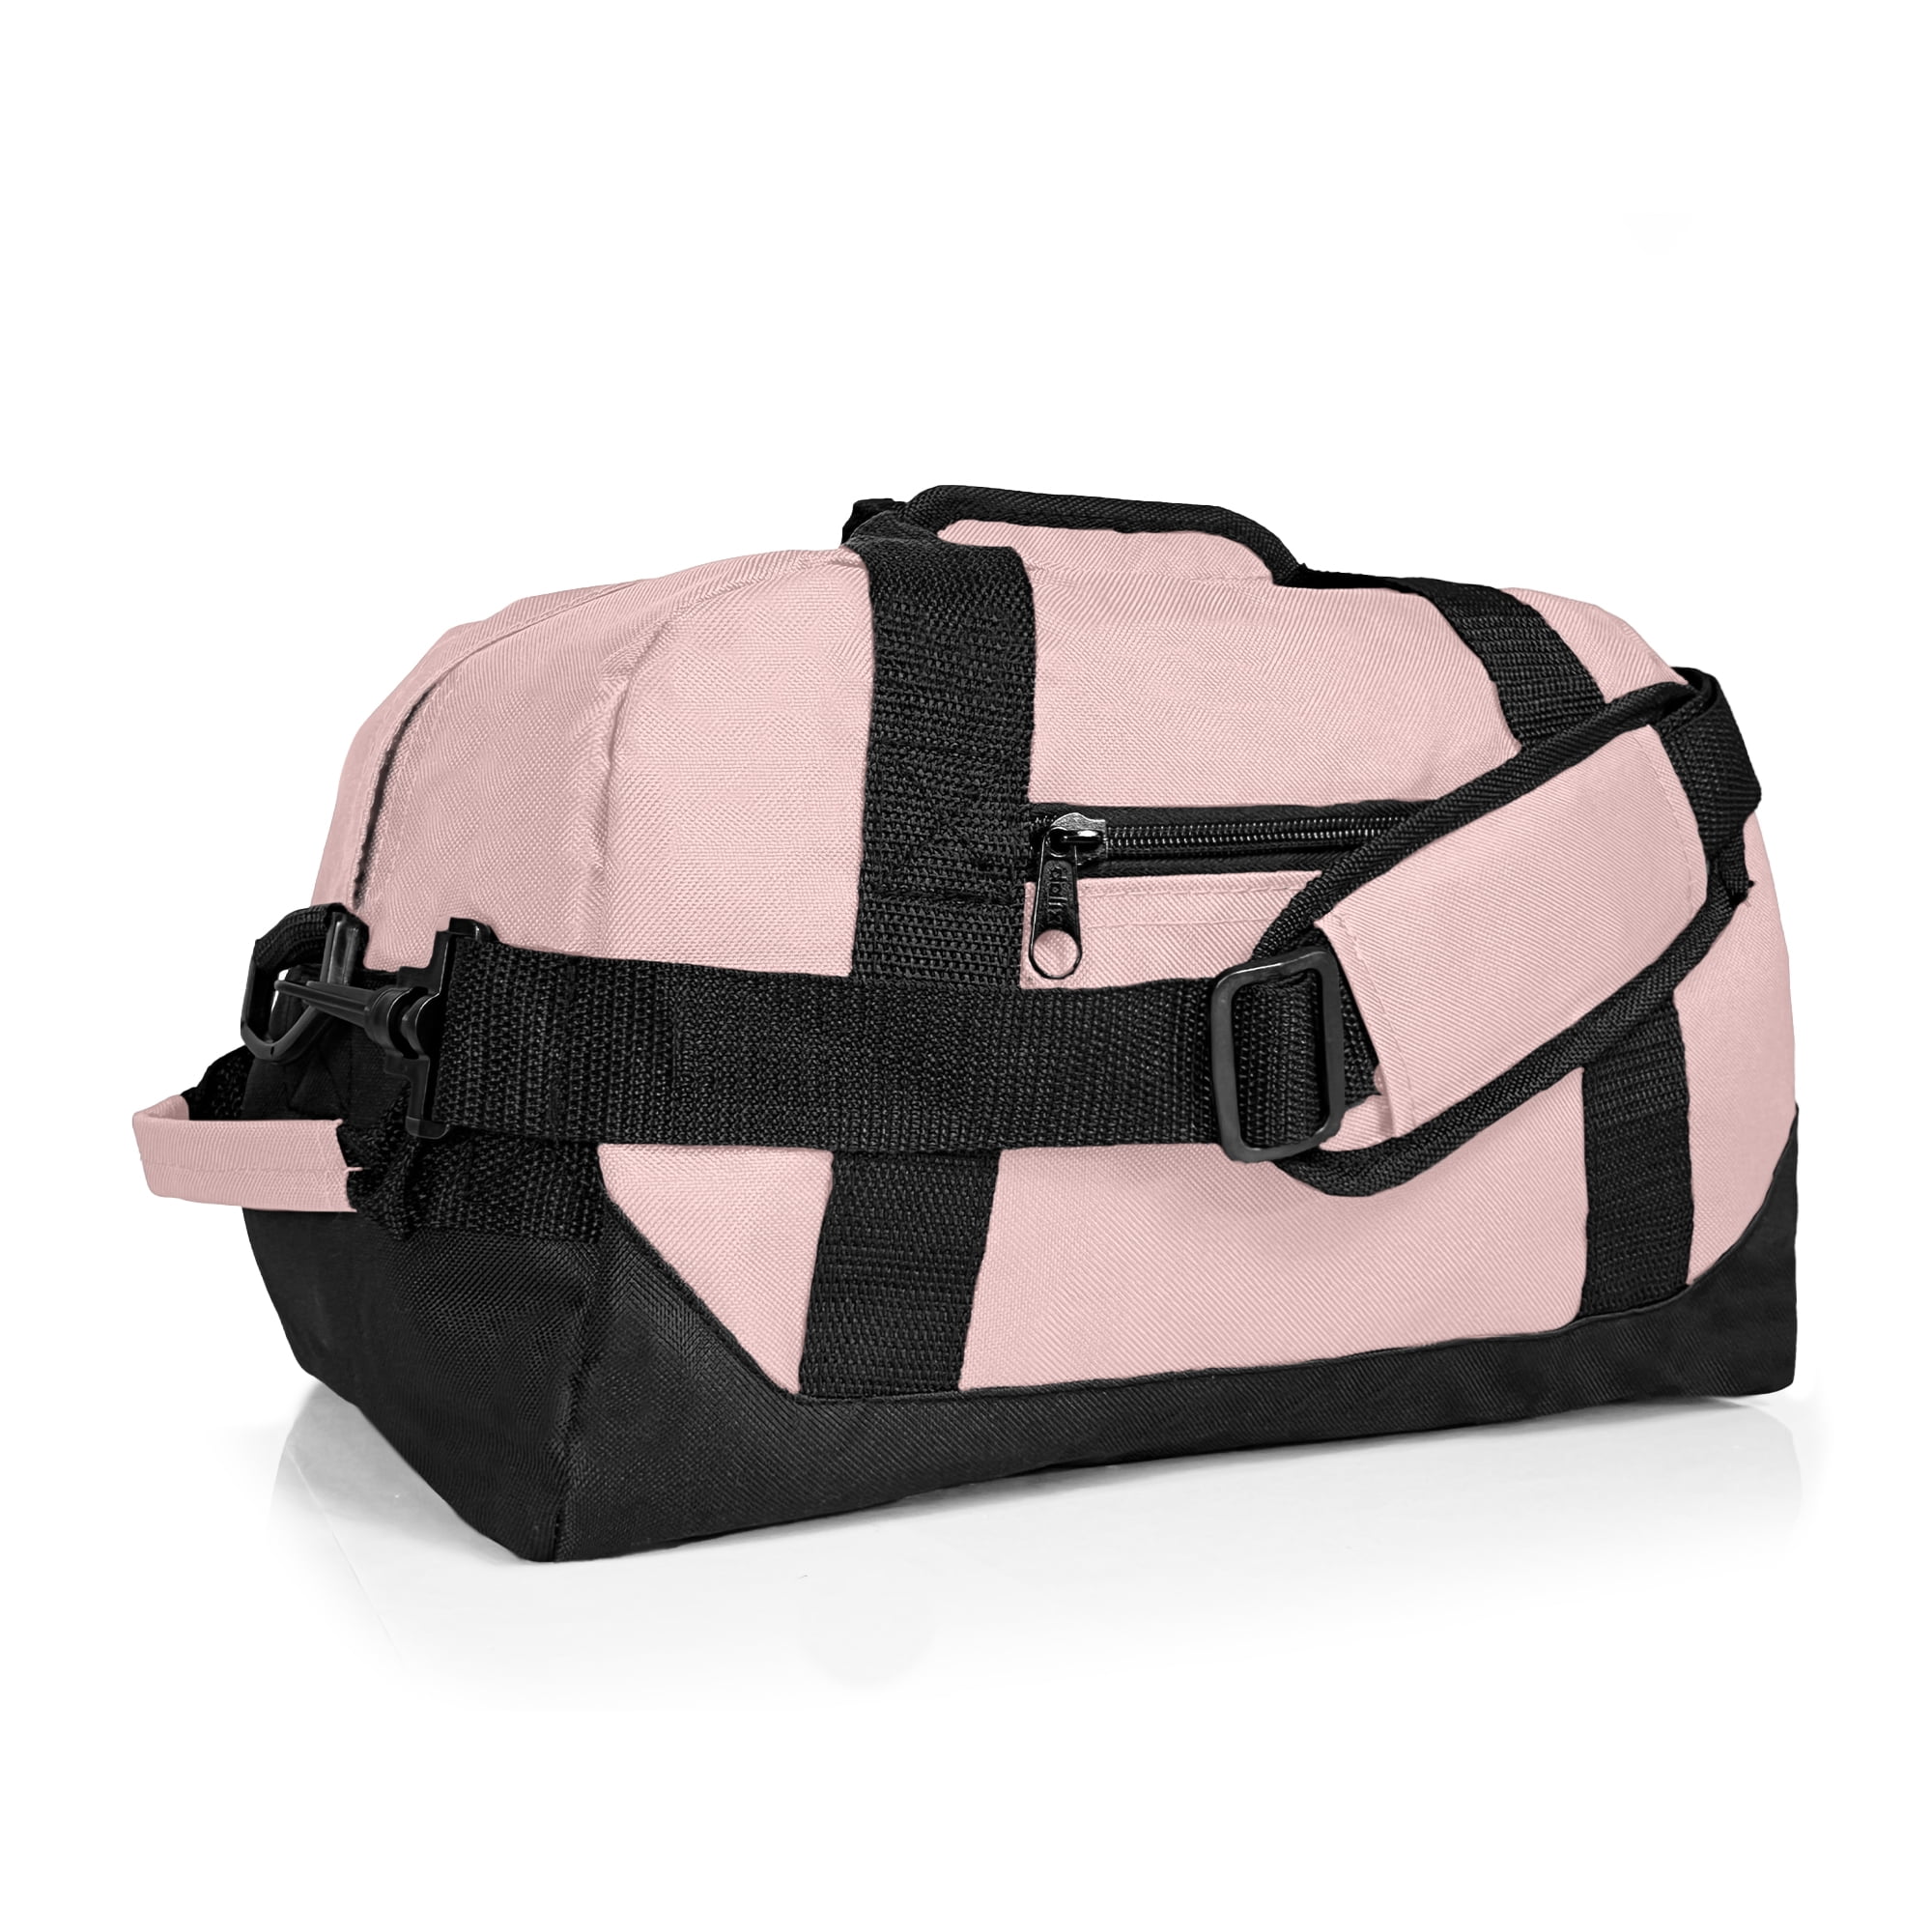 DALIX 14 Small Duffel Bag Gym Duffle Two Tone in Pink with